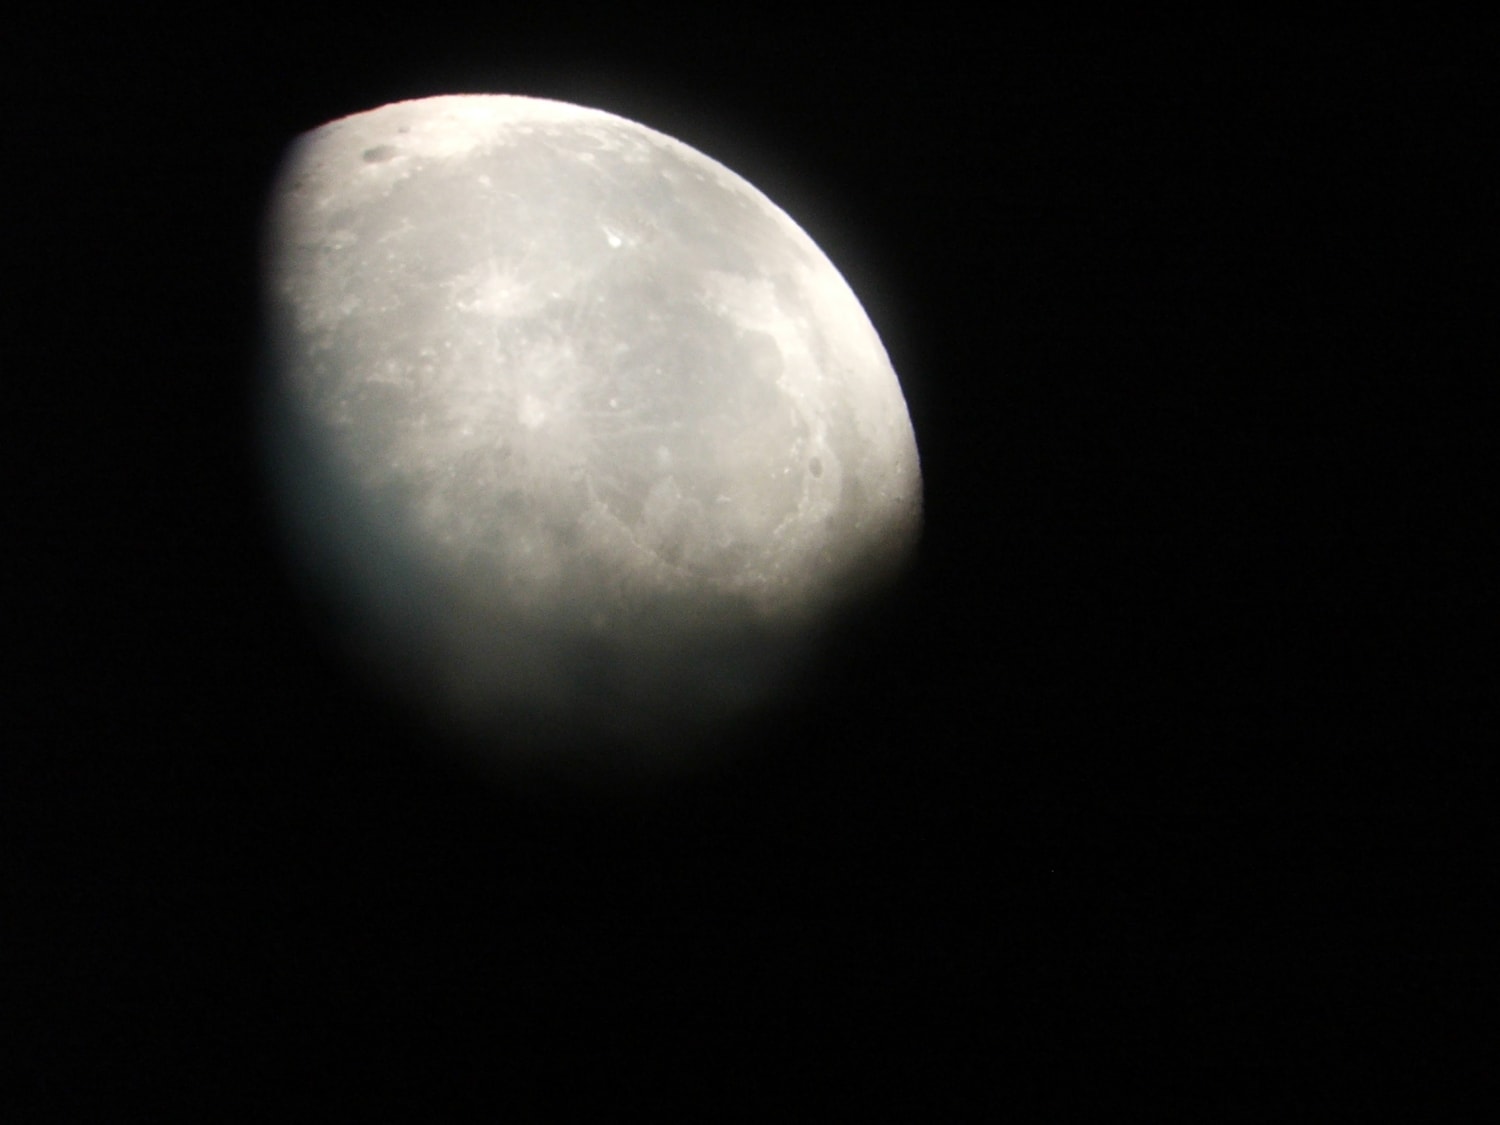 This picture of the moon my dad took back in 2005 is what got me into astronomy.